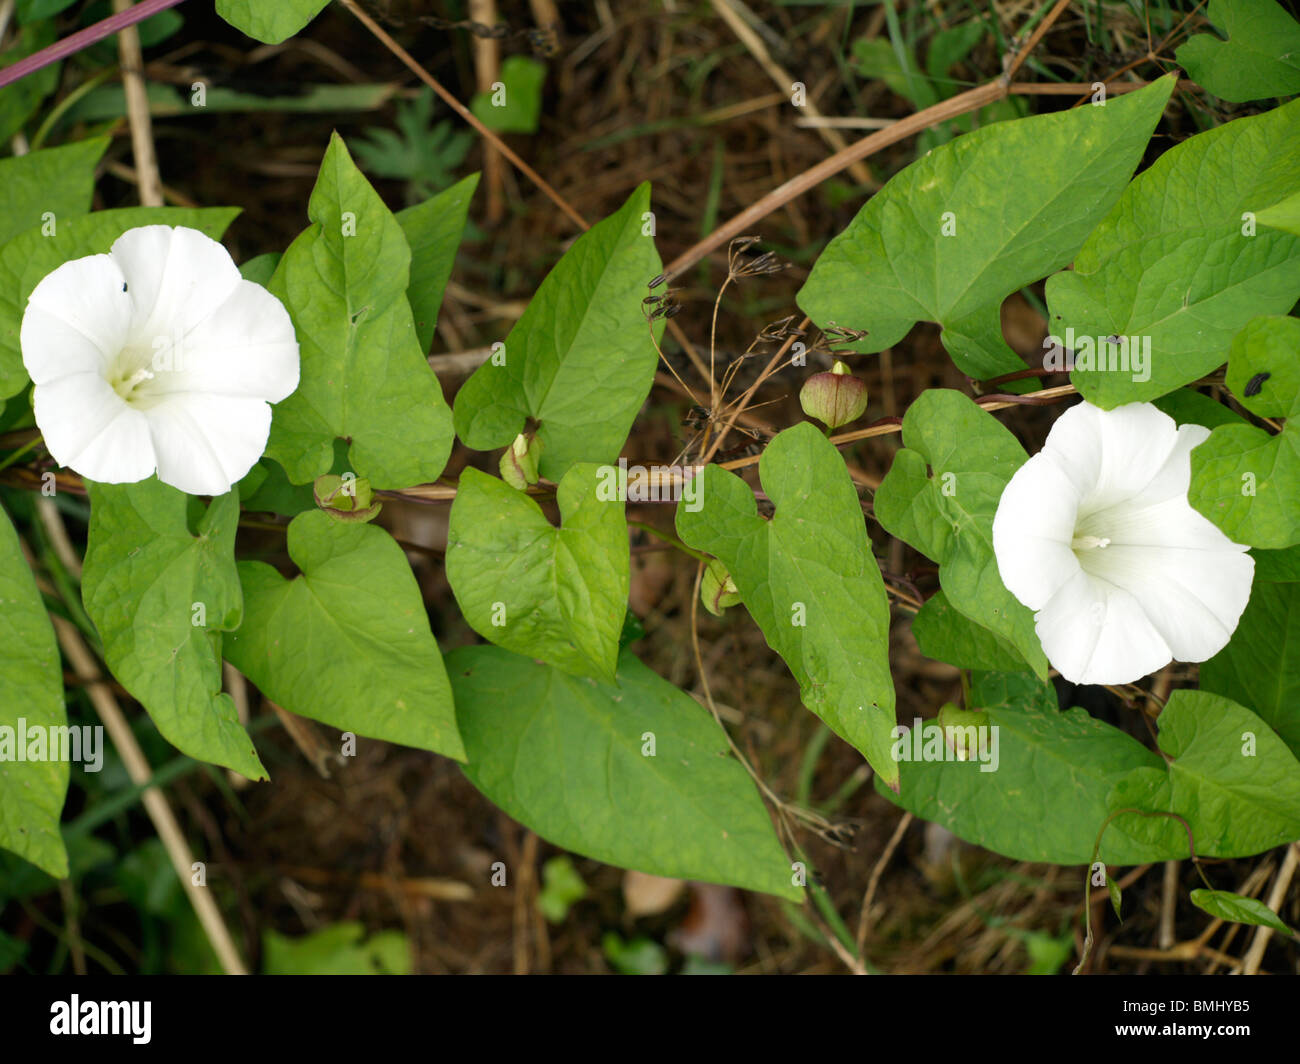 Hedge Bindweed showing two white flowers and a runner with leaves, Convolvulus arvensis Stock Photo